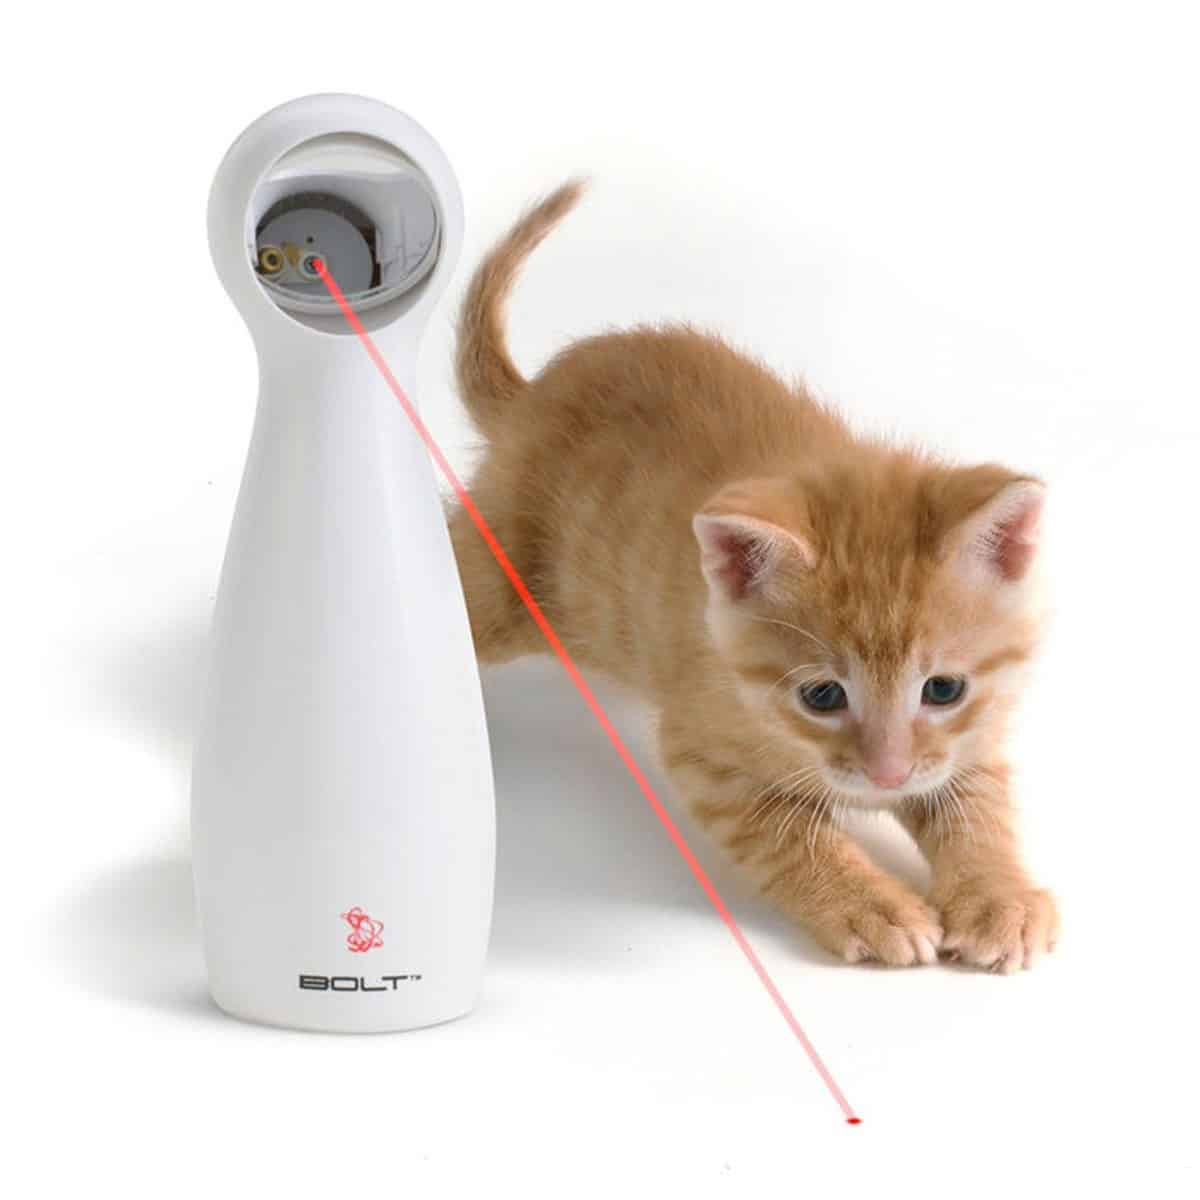 FroliCat Bolt | Must-Have Pet Tech For Your Cats and Dogs